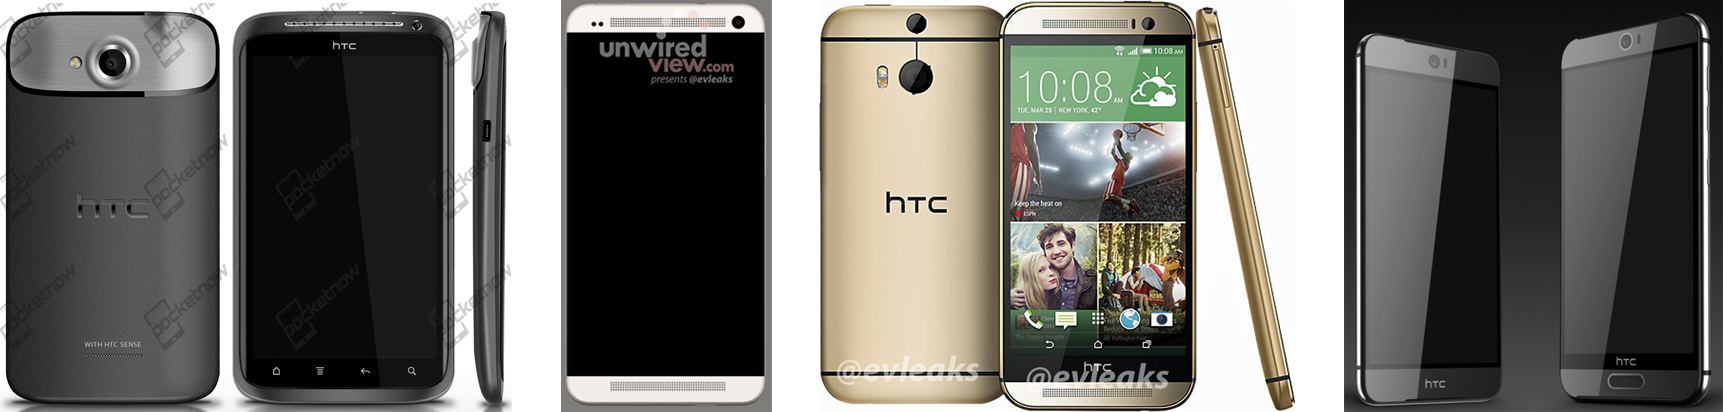 Alleged HTC One (M9) and One (M9) Plus, pictured on the right - Alleged HTC One (M9) and M9 Plus renders leaked: sleeker design, large front camera, fingerprint scanner included